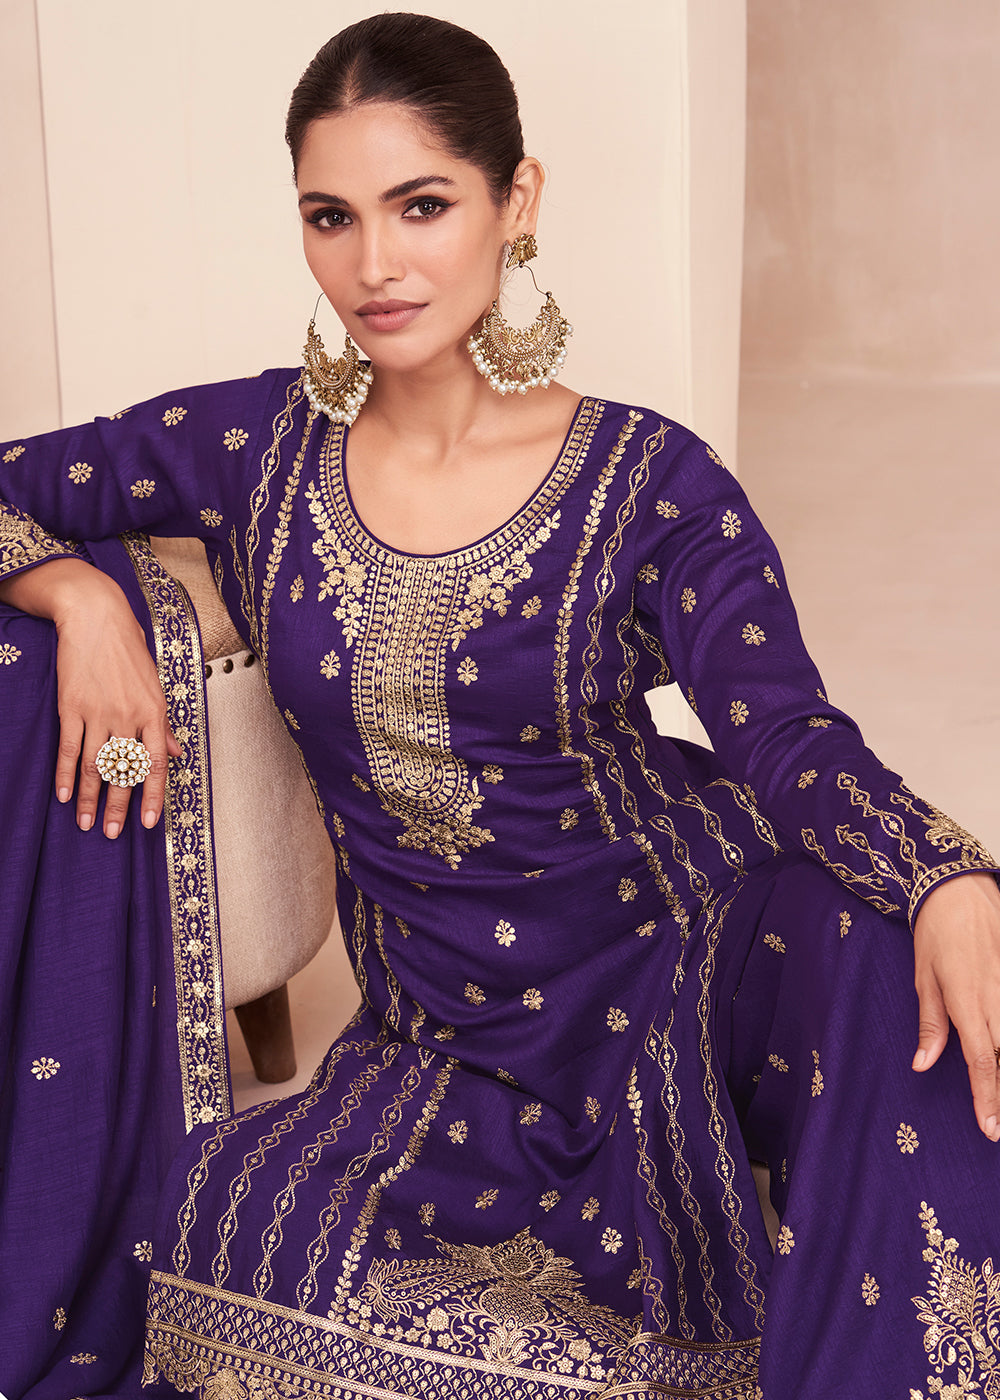 Buy Now Captivating Purple Zari Embroidered Palazzo Salwar Suit Online in USA, UK, Canada, Germany, Australia & Worldwide at Empress Clothing